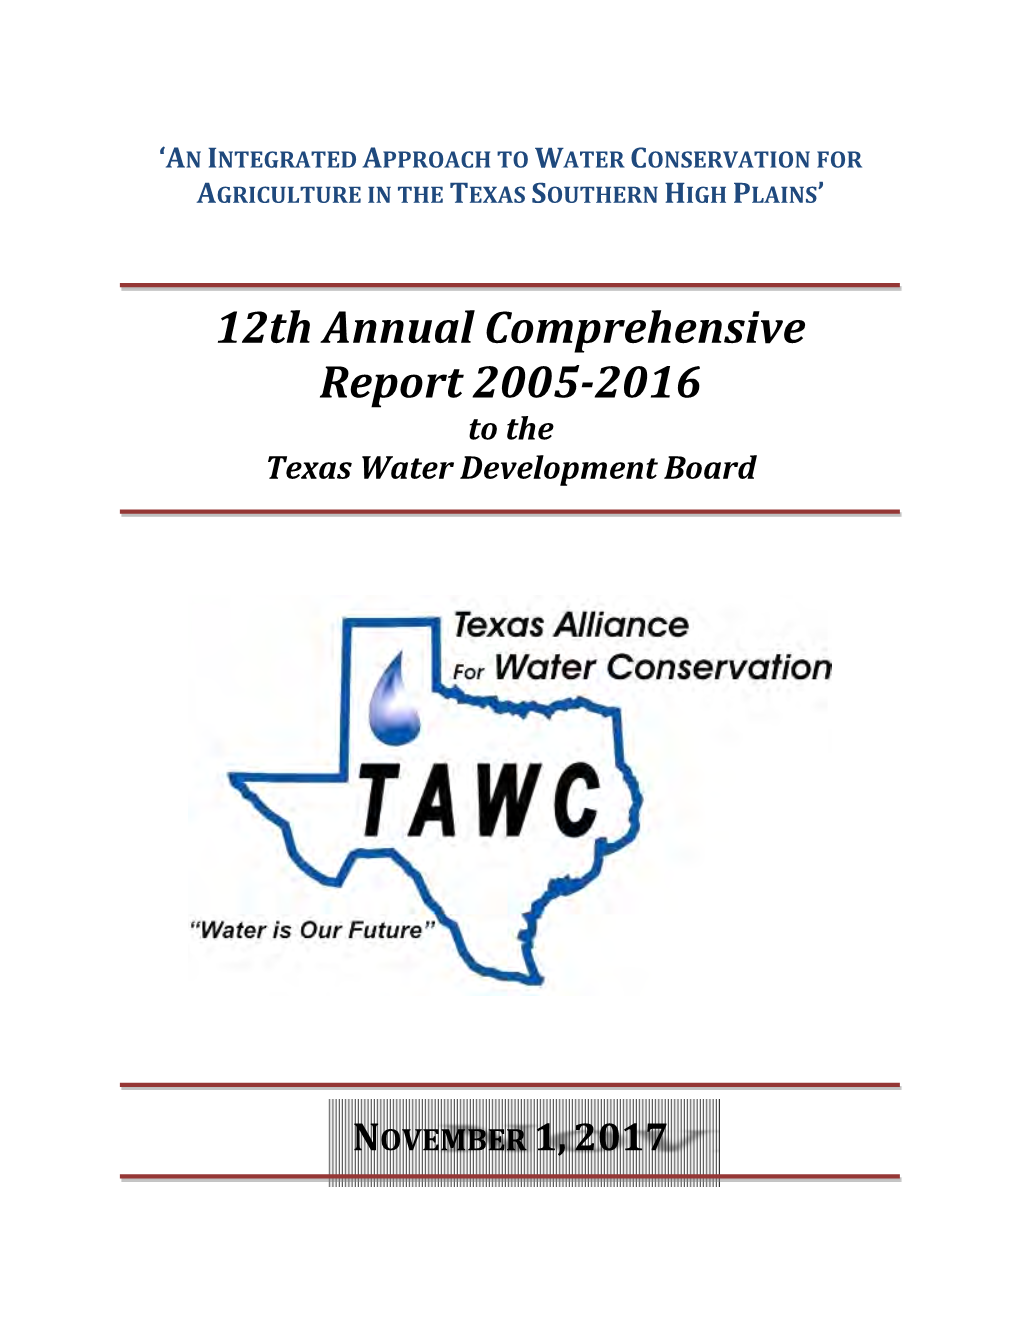 12Th Annual Comprehensive Report 2005-2016 to the Texas Water Development Board